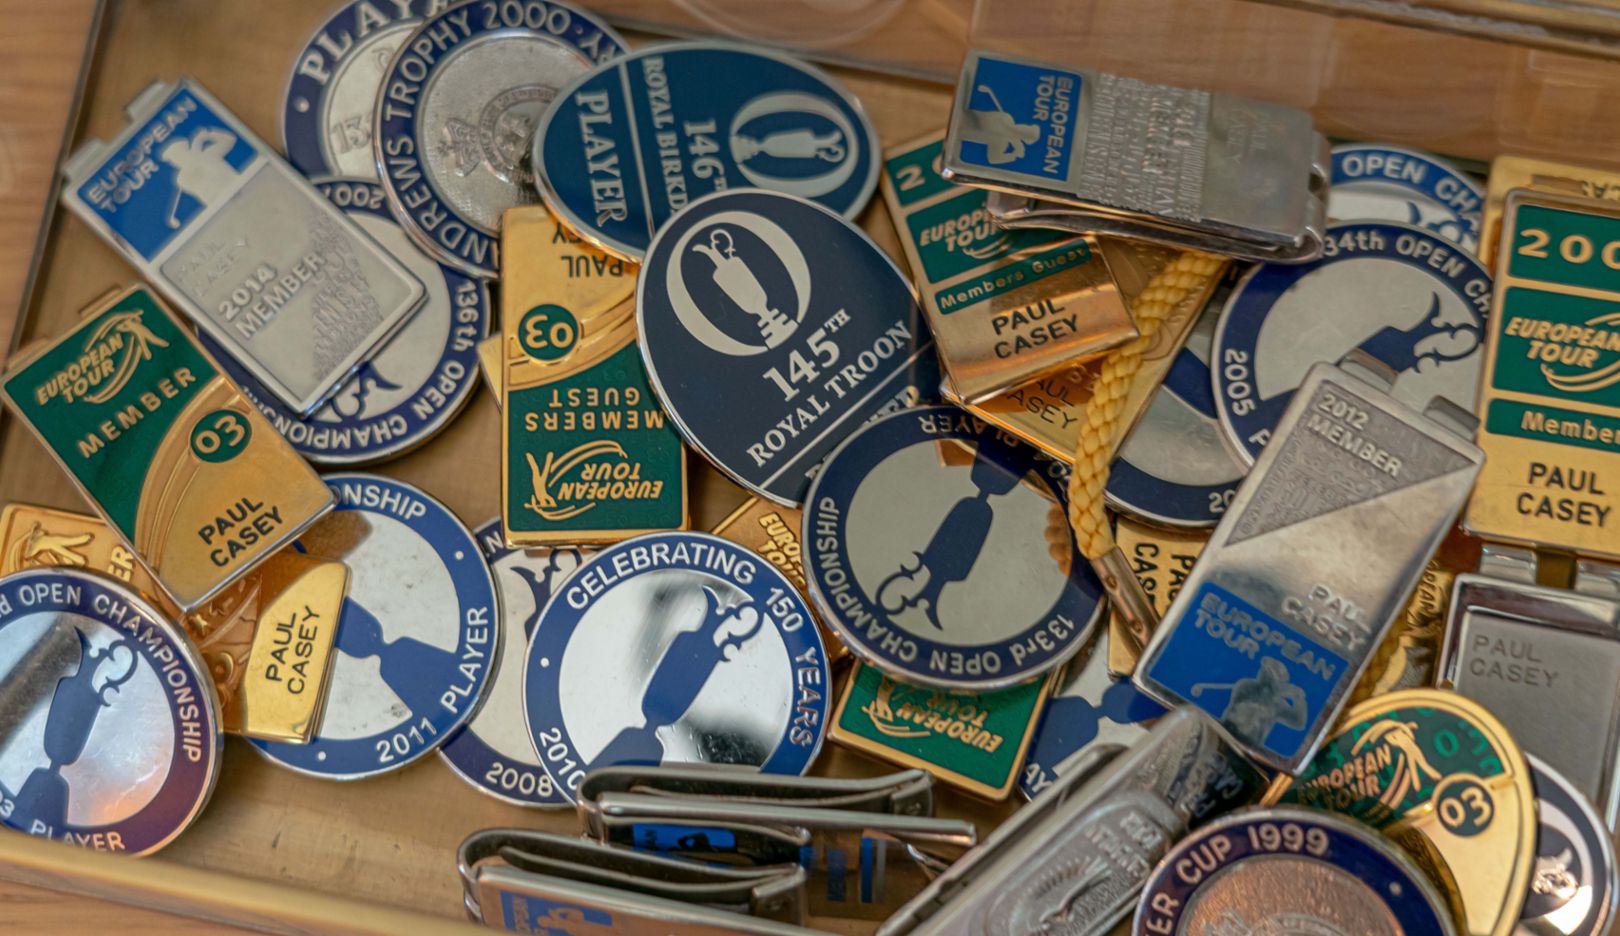 Each badge holds a memory: “I was tough as nails to myself and to others.”